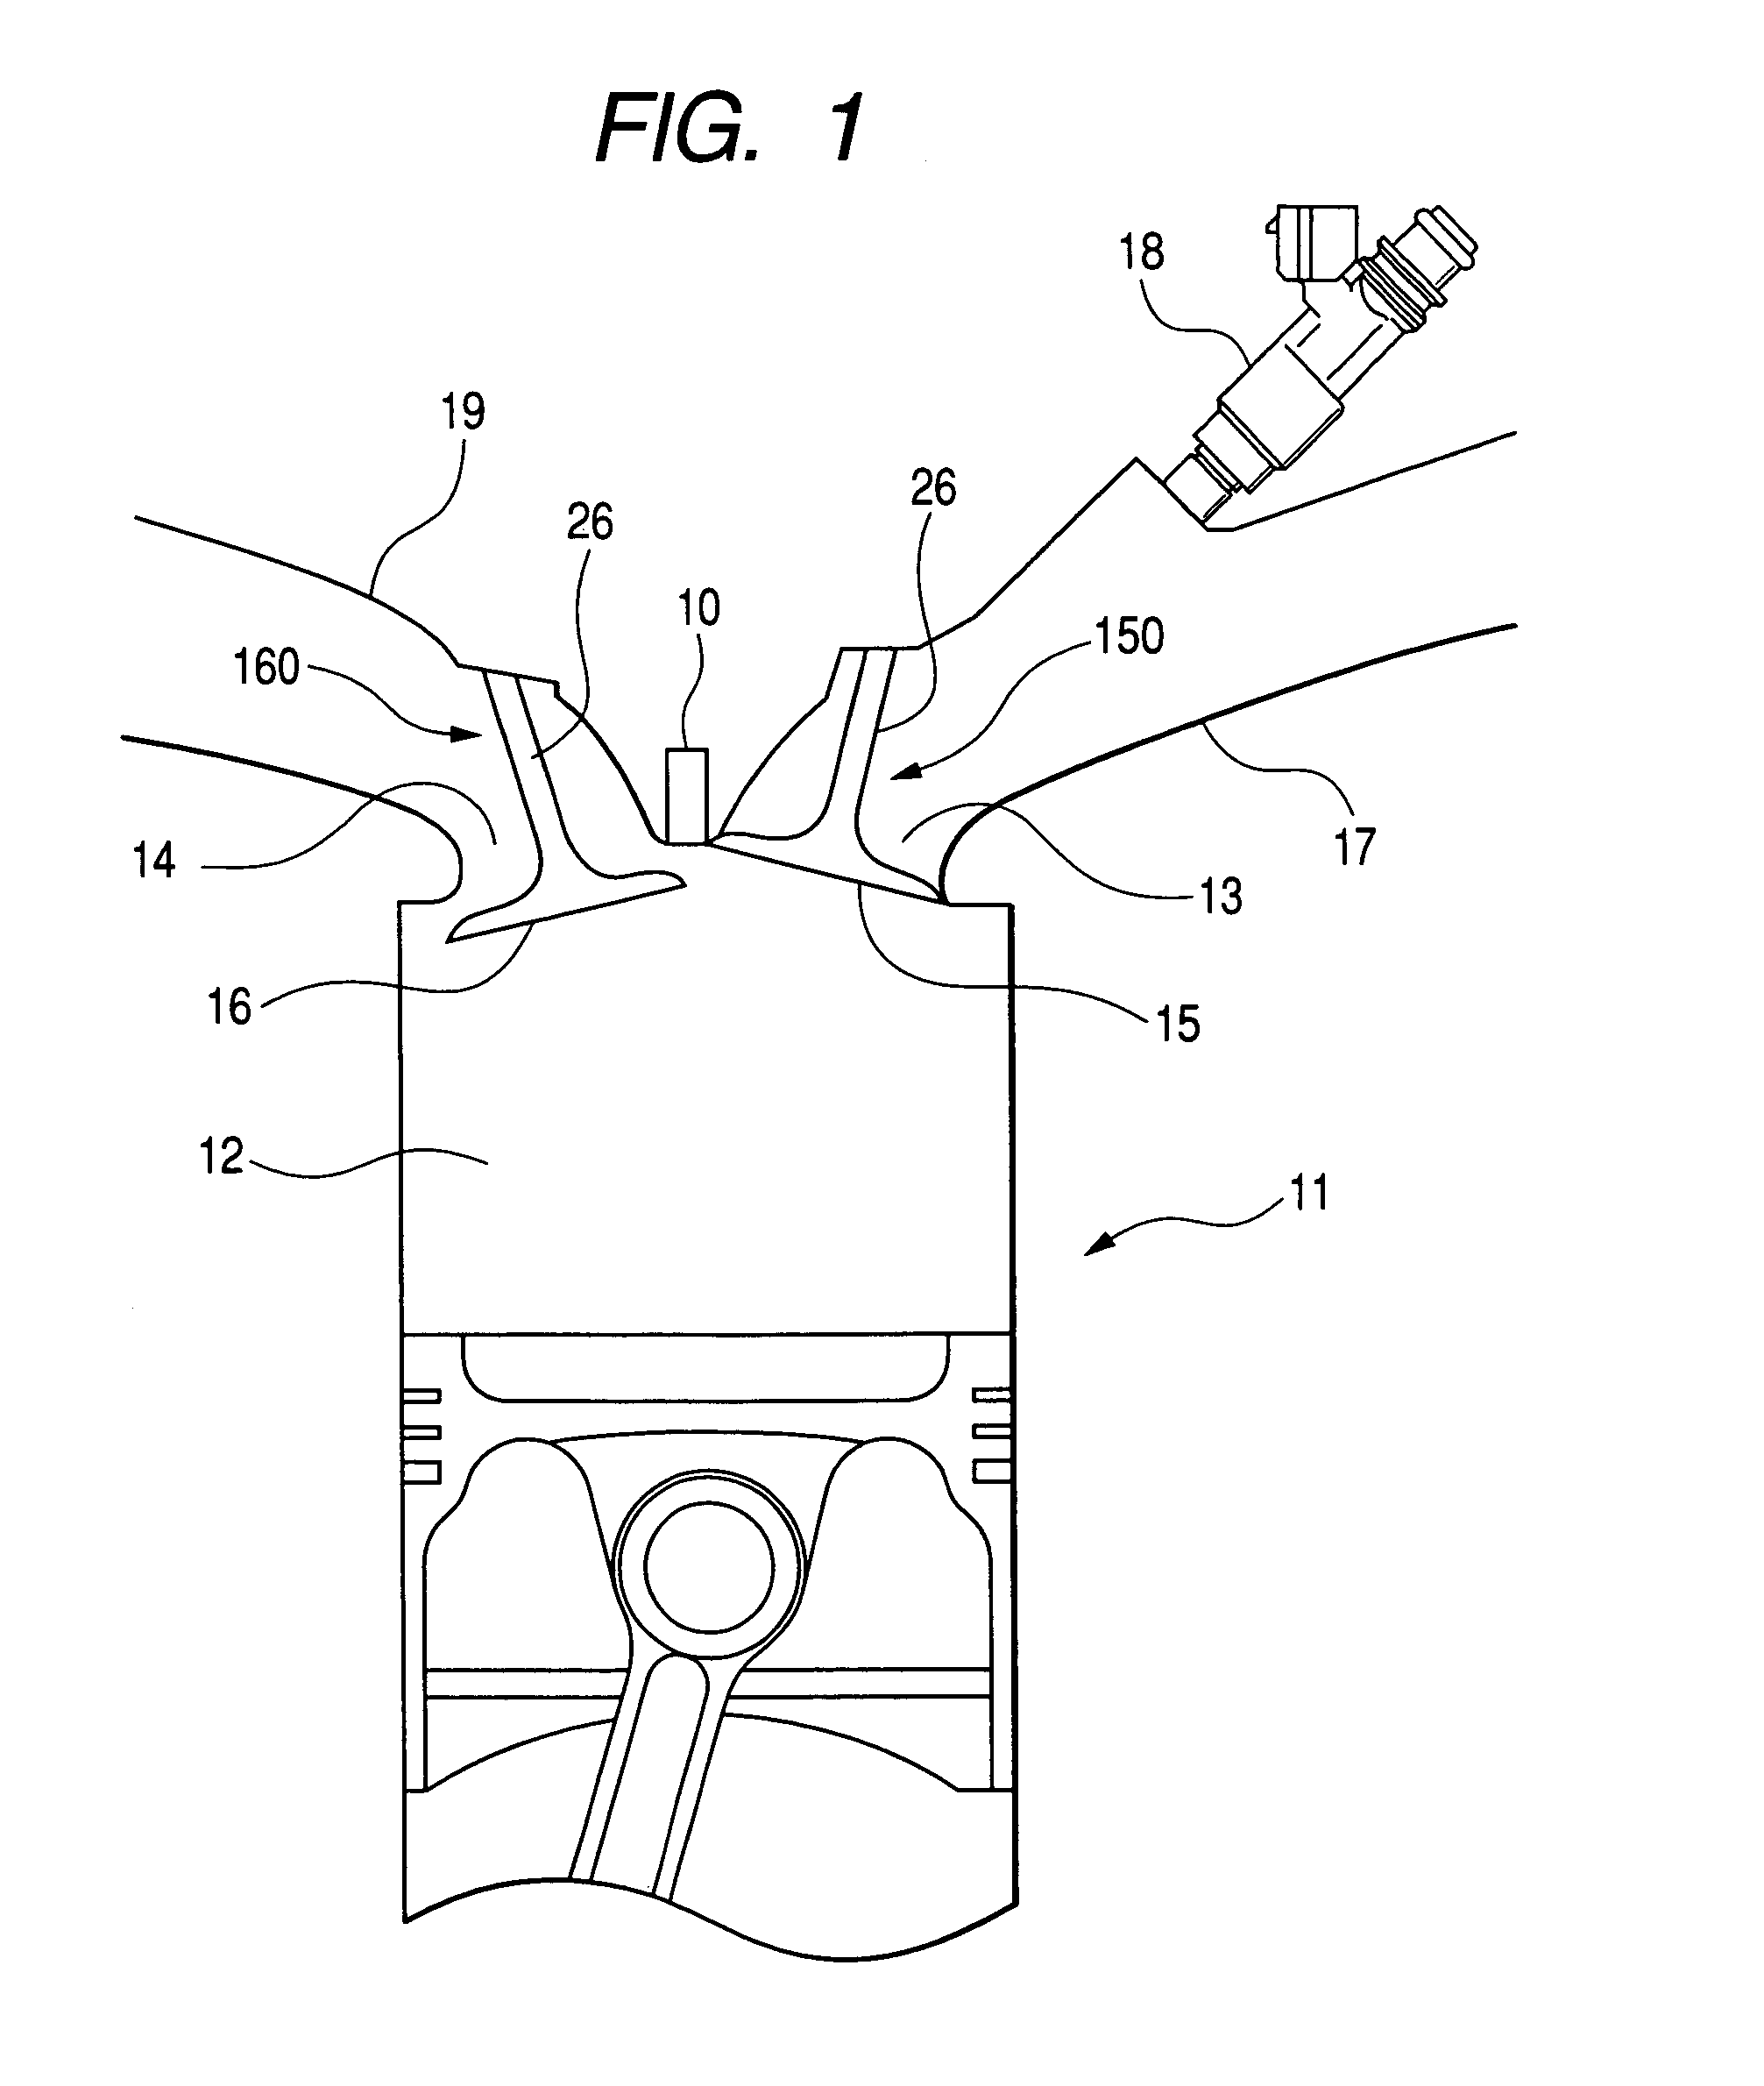 Fuel injector designed to optimize pattern of fuel spray